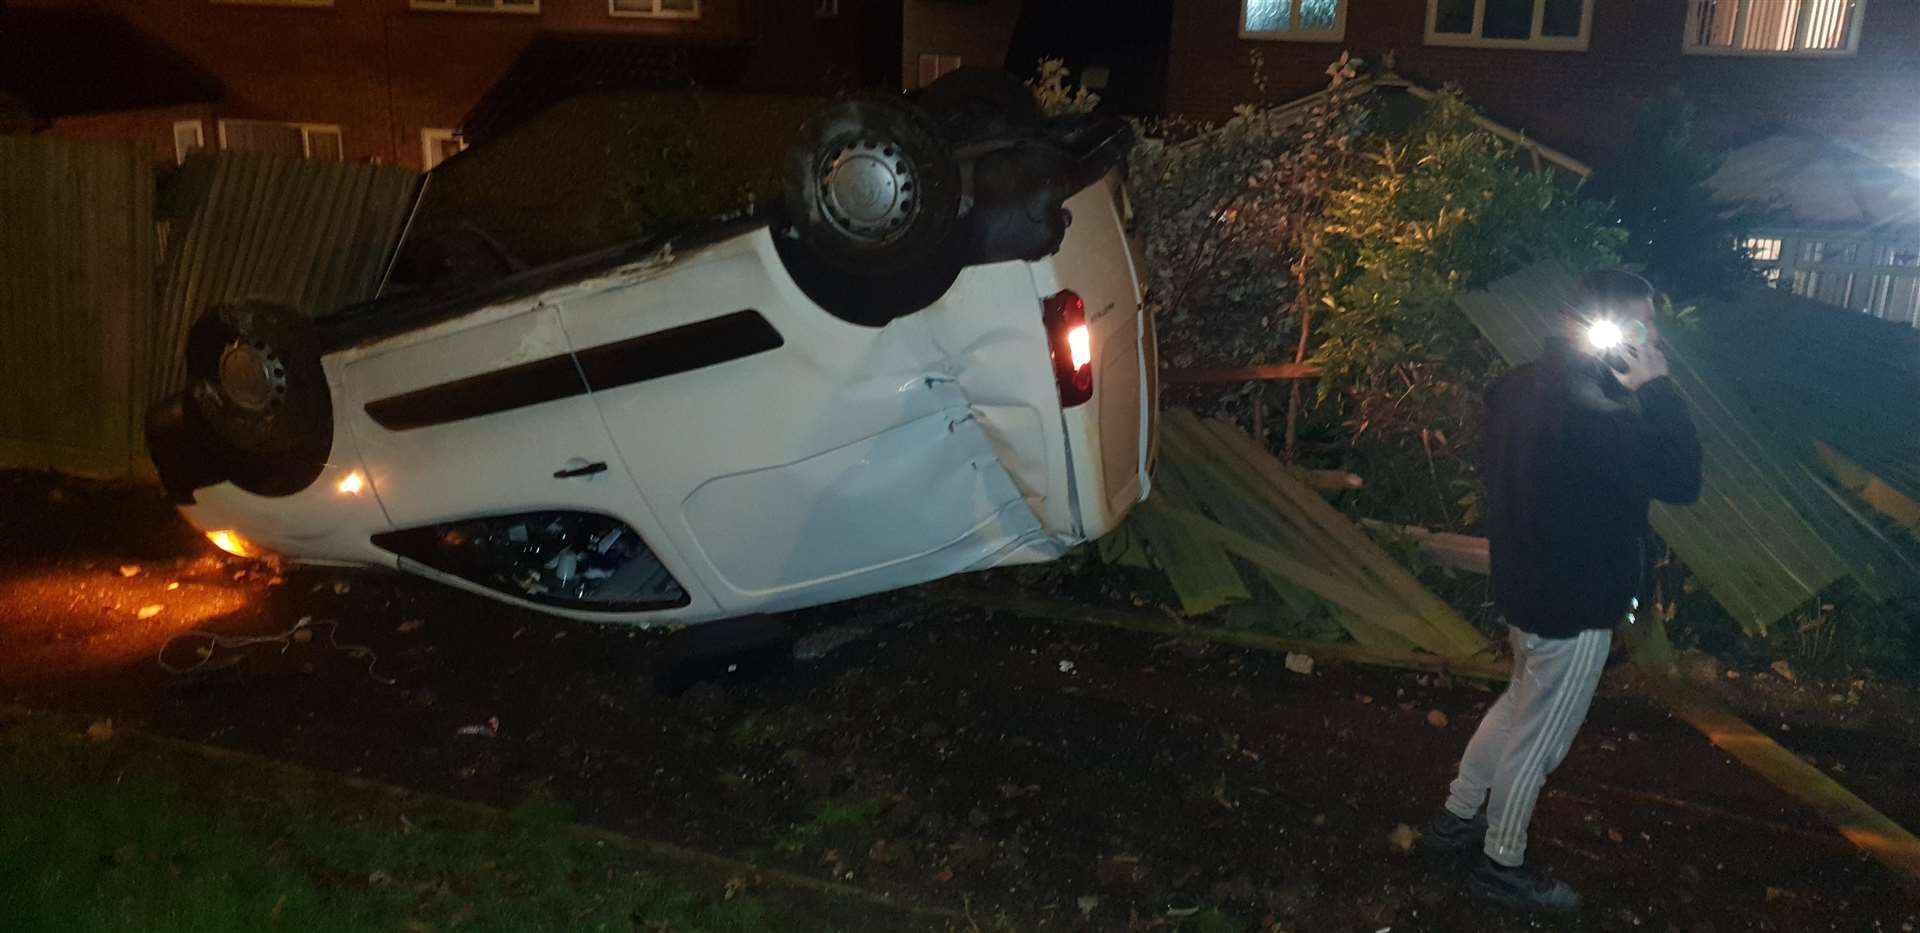 The van flipped on its roof and flattened two garden fences in the back garden in Hempstead Valley Drive, Hempstead